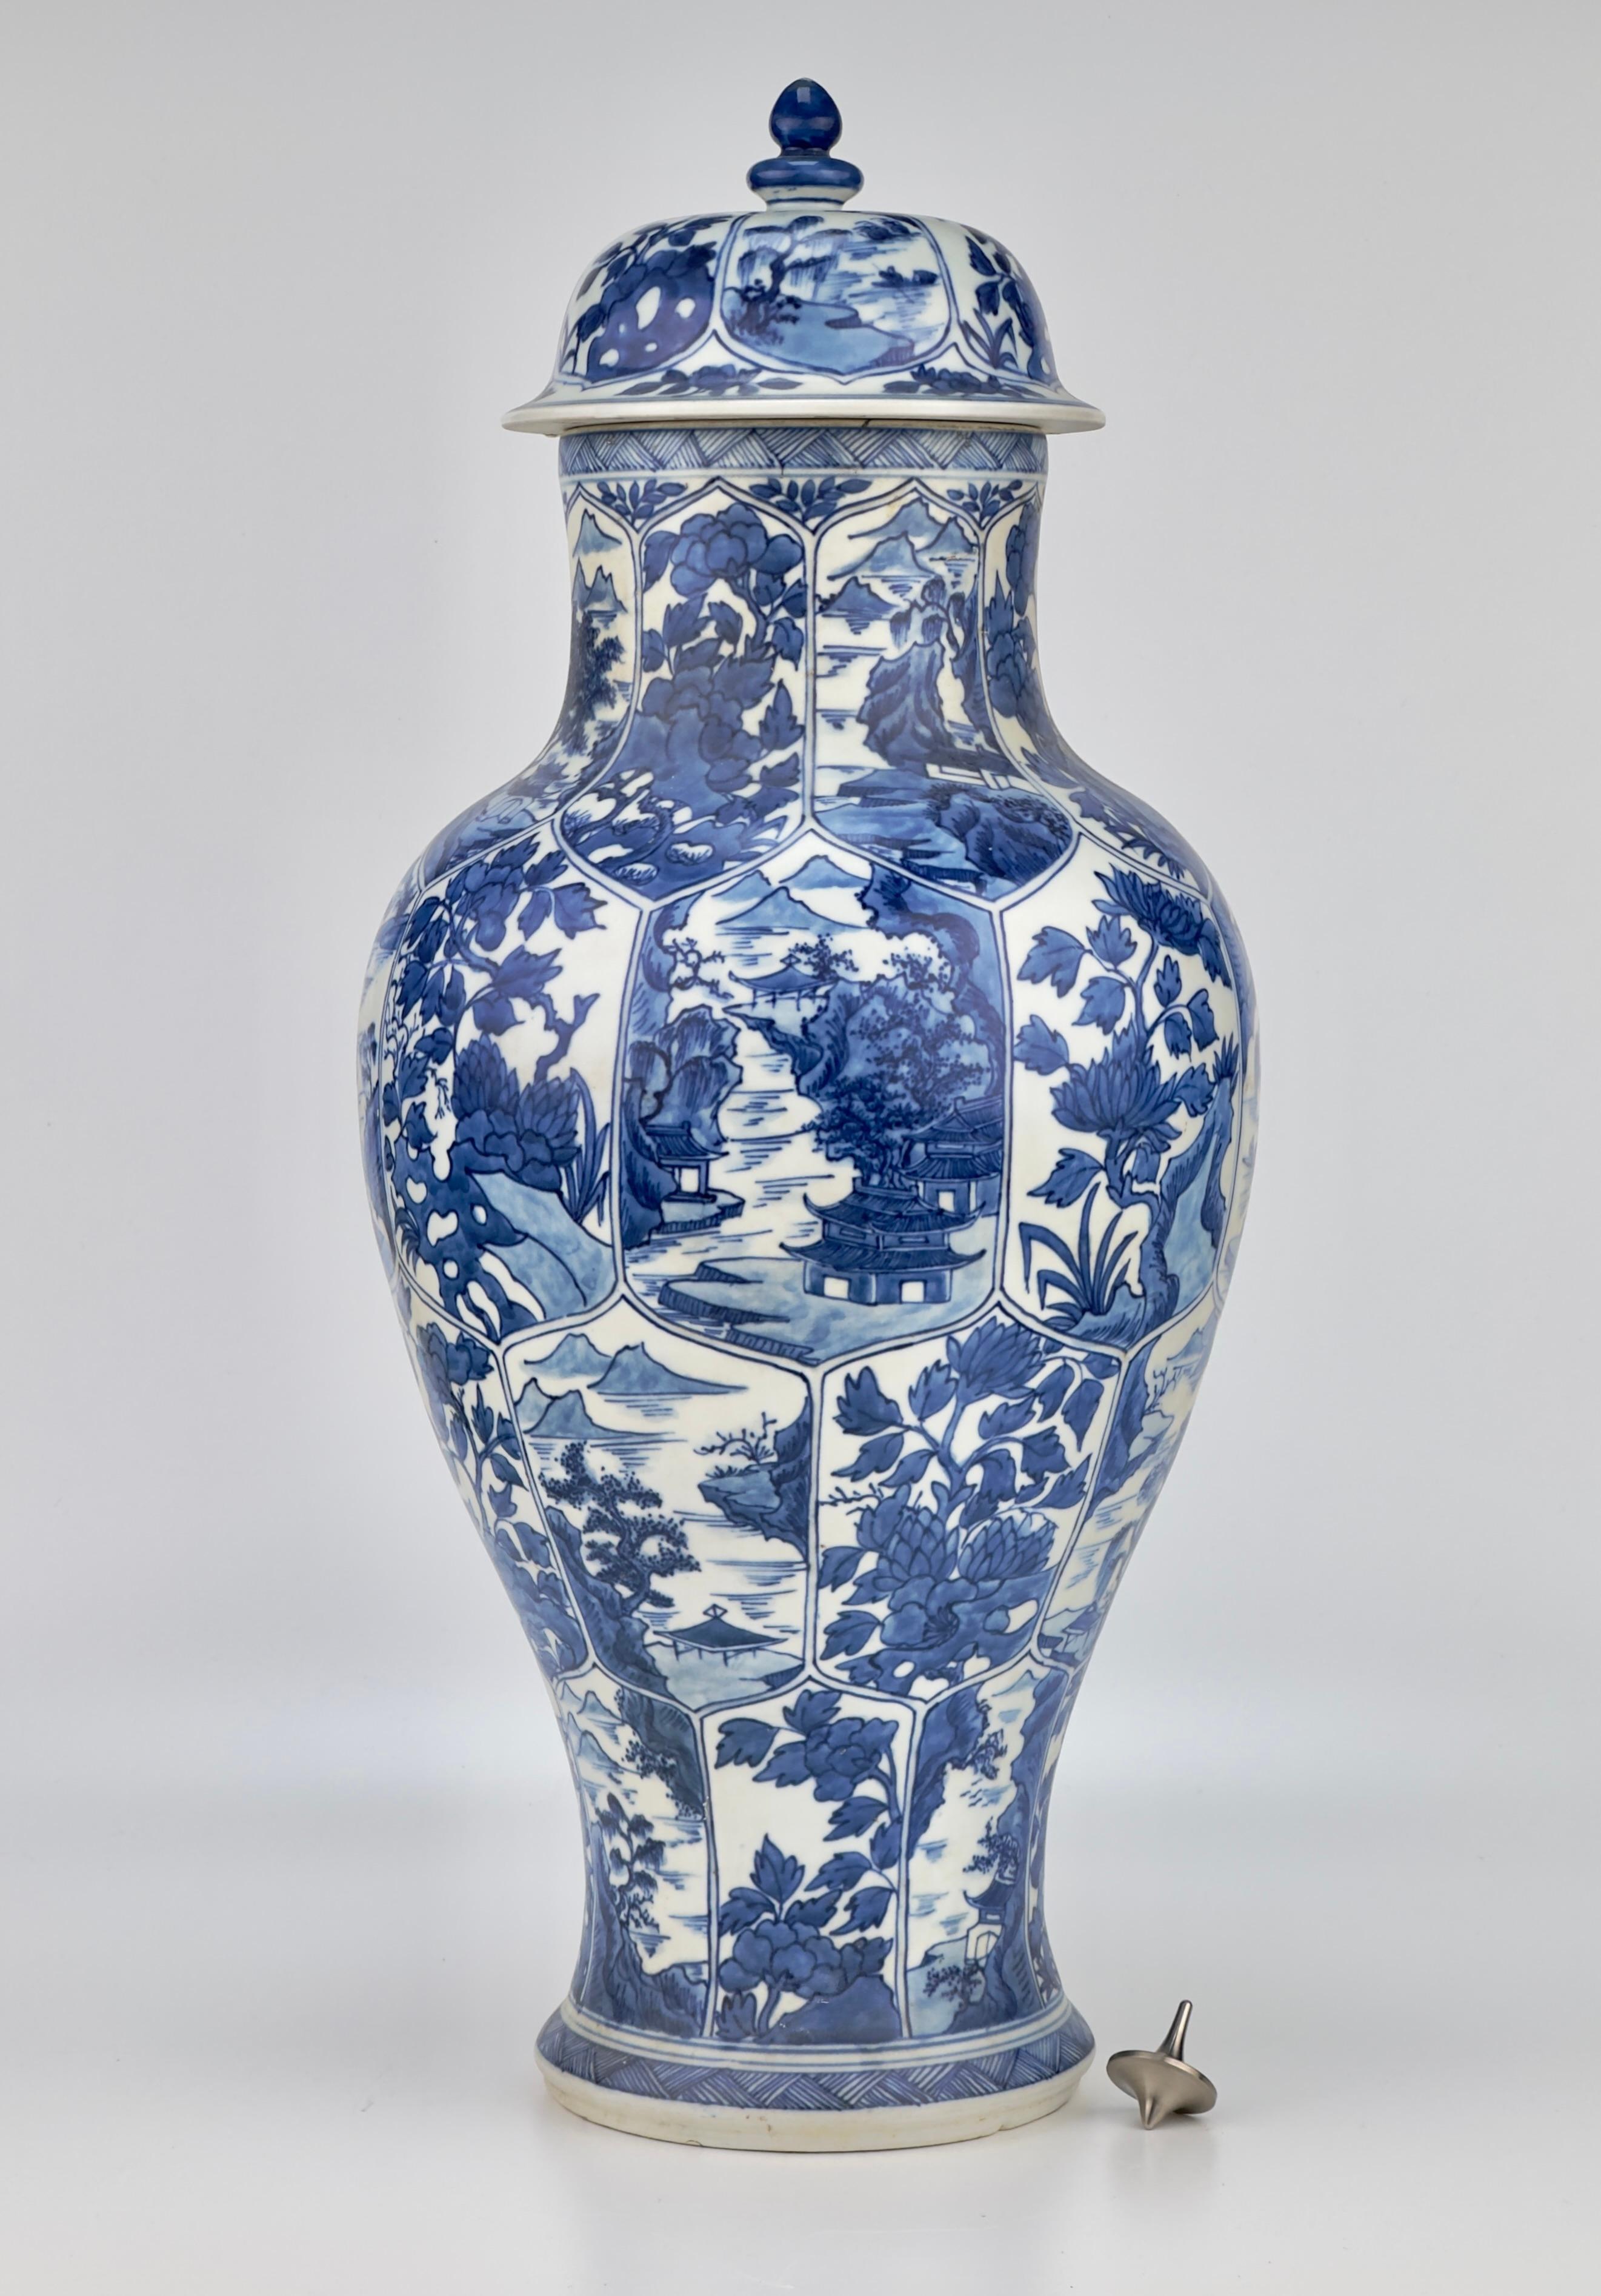 Large rare vase painted with petal-shaped panels of 'Landscapes and Flowers' pattern.

Period : Qing Dynasty, Kangxi Period
Production Date : 1690-1699
Made in : Jingdezhen
Destination : Netherland
Found/Acquired : Southeast Asia , South China Sea,